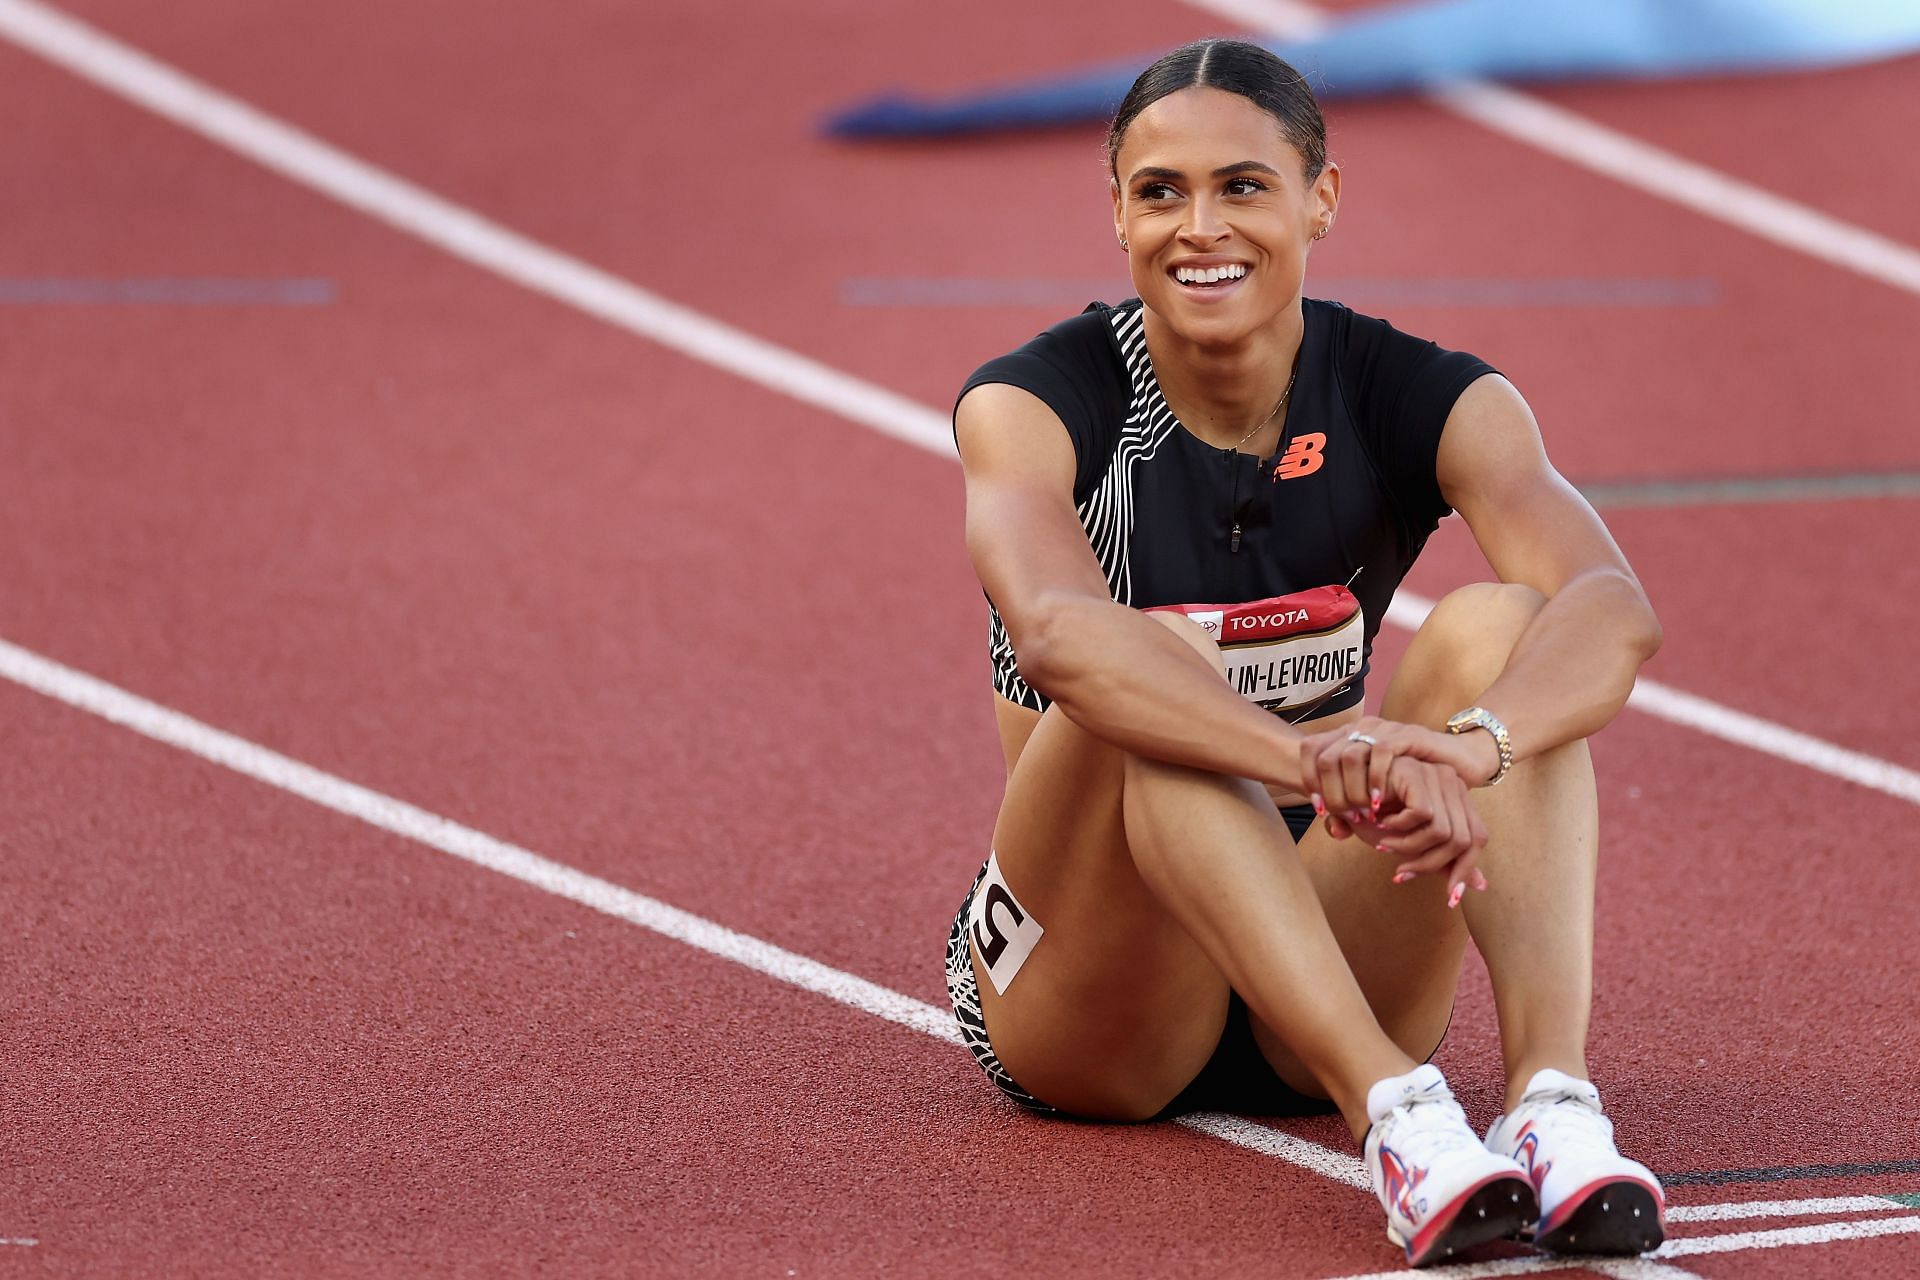 Sydney McLaughlin-Levrone at the 2023 USATF Outdoor Championships